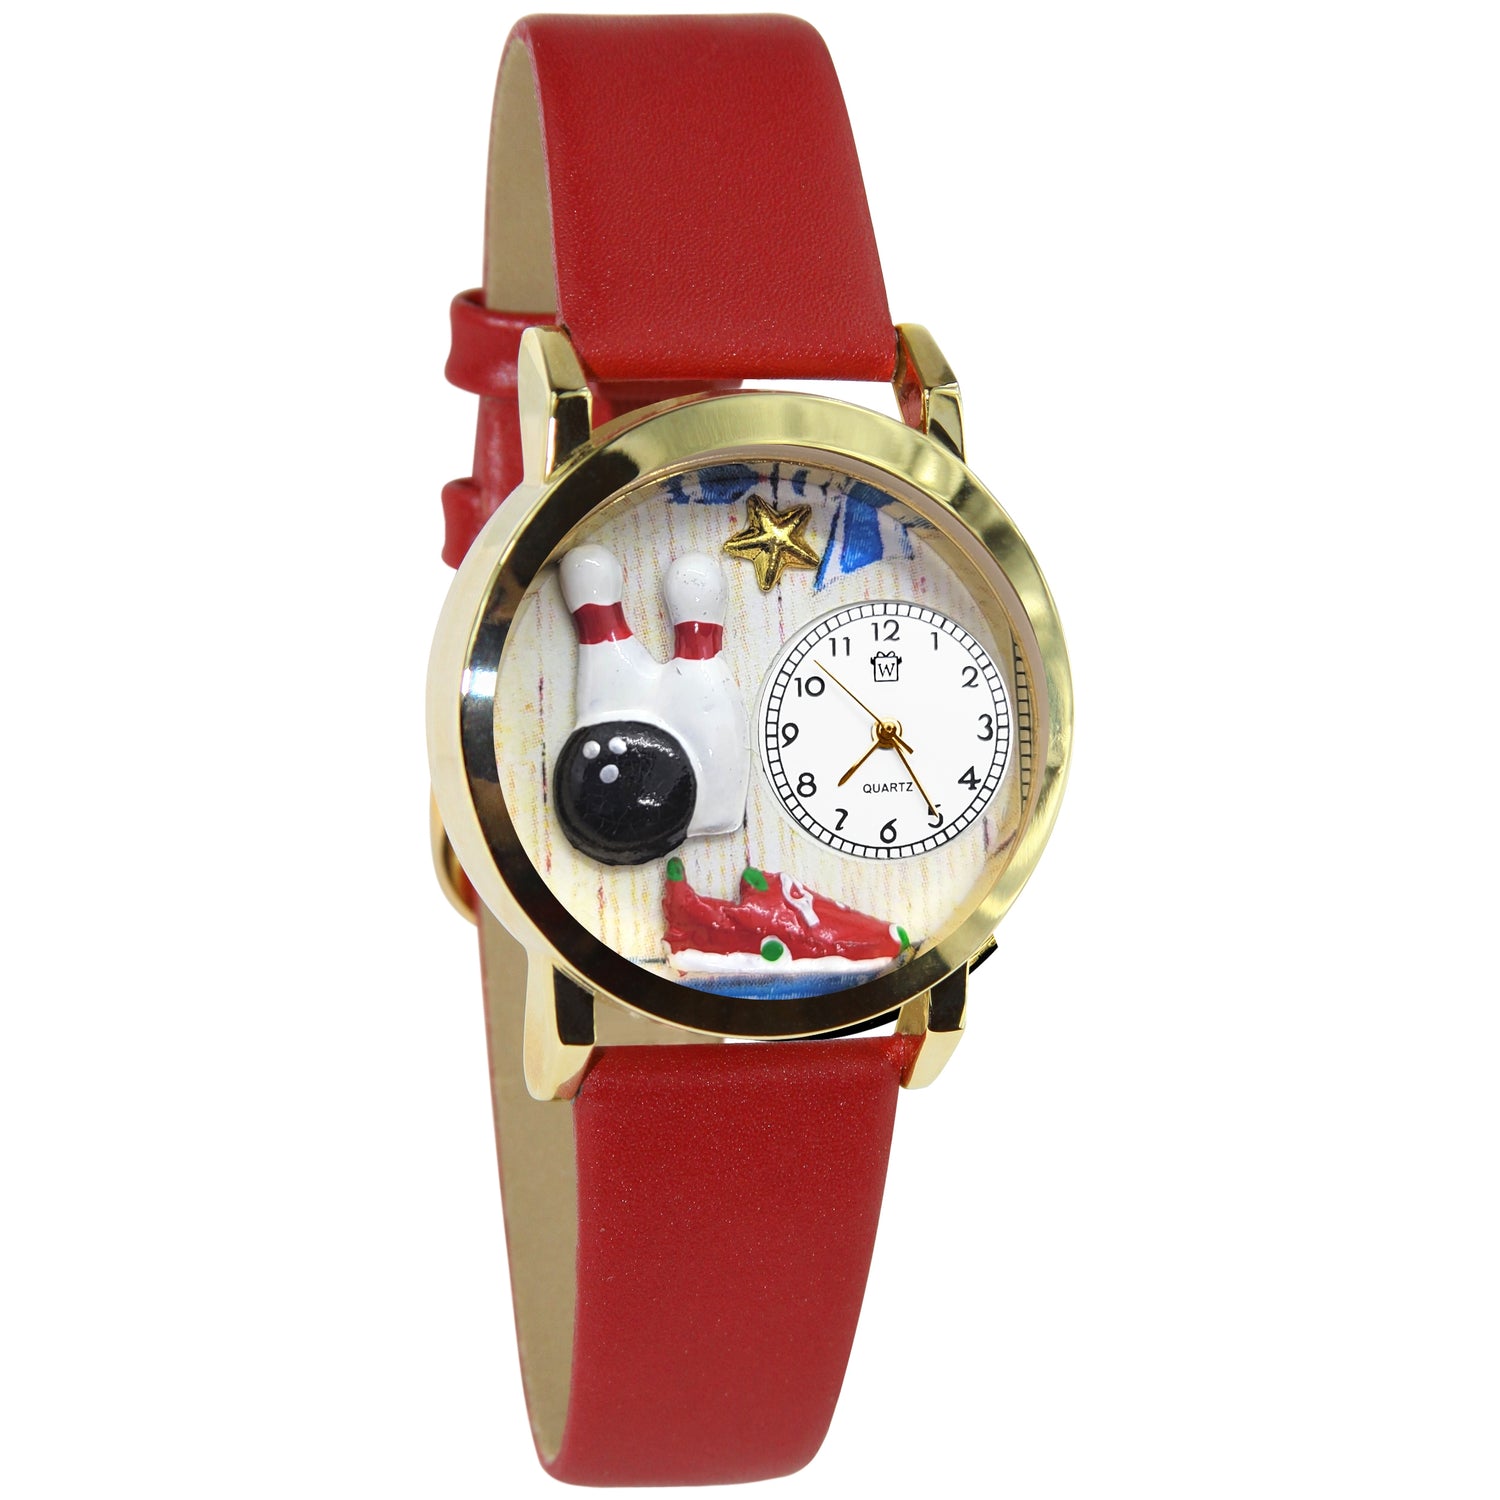 Whimsical Gifts | Bowling 3D Watch Small Style | Handmade in USA | Hobbies & Special Interests | Sports | Novelty Unique Fun Miniatures Gift | Gold Finish Red Leather Watch Band